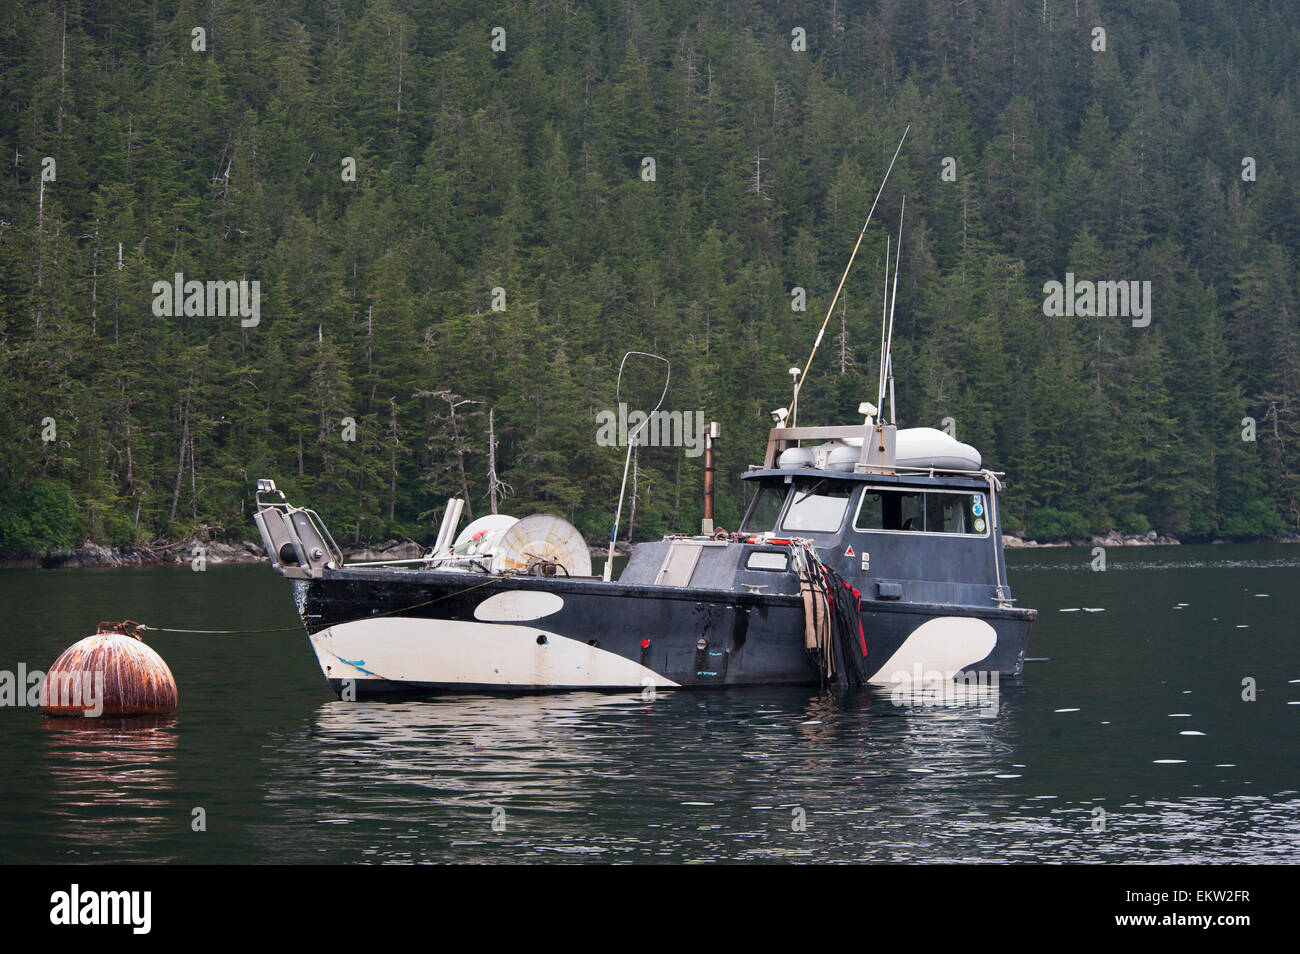 Commercial fishing boat 'Wanda Sue' painted like an Orca whale, Prince William Sound, Southcentral Alaska Stock Photo